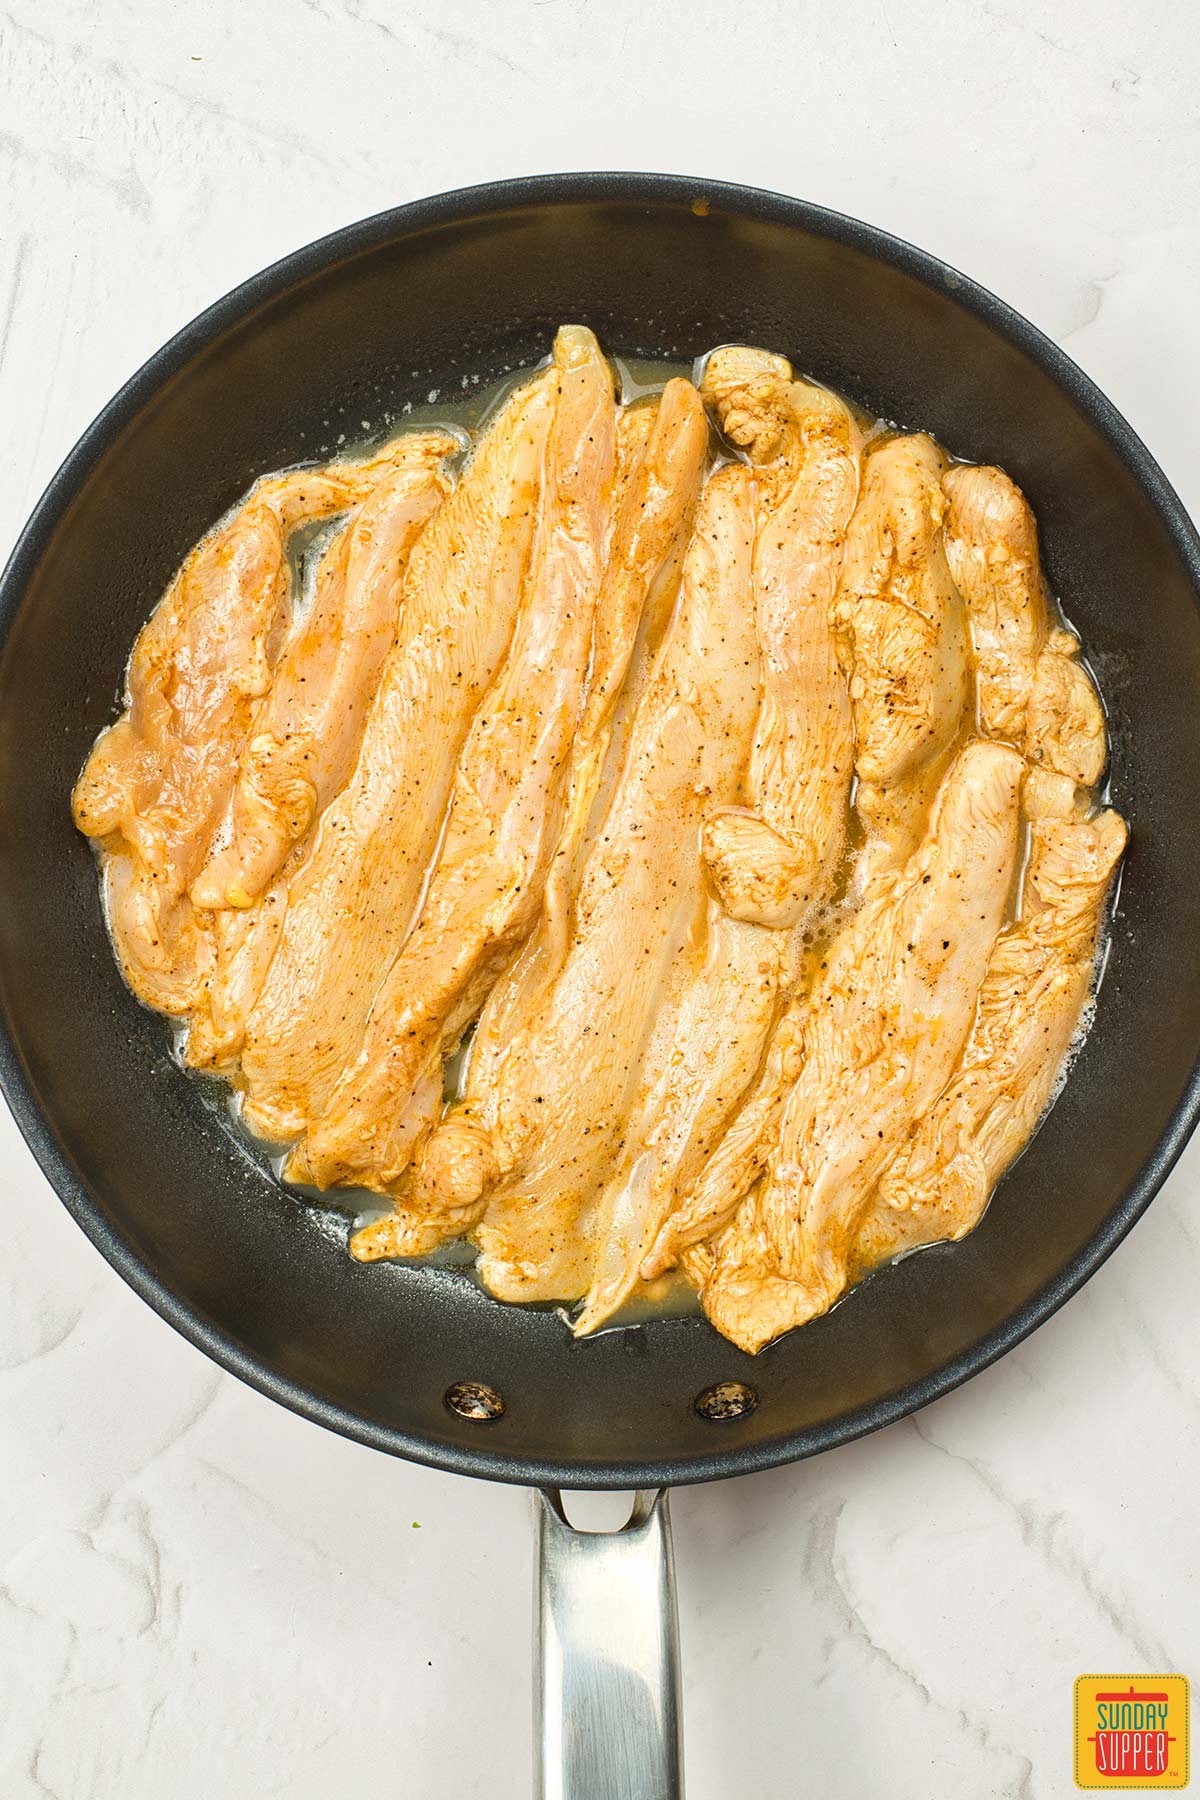 the marinated chicken placed in a pan to cook